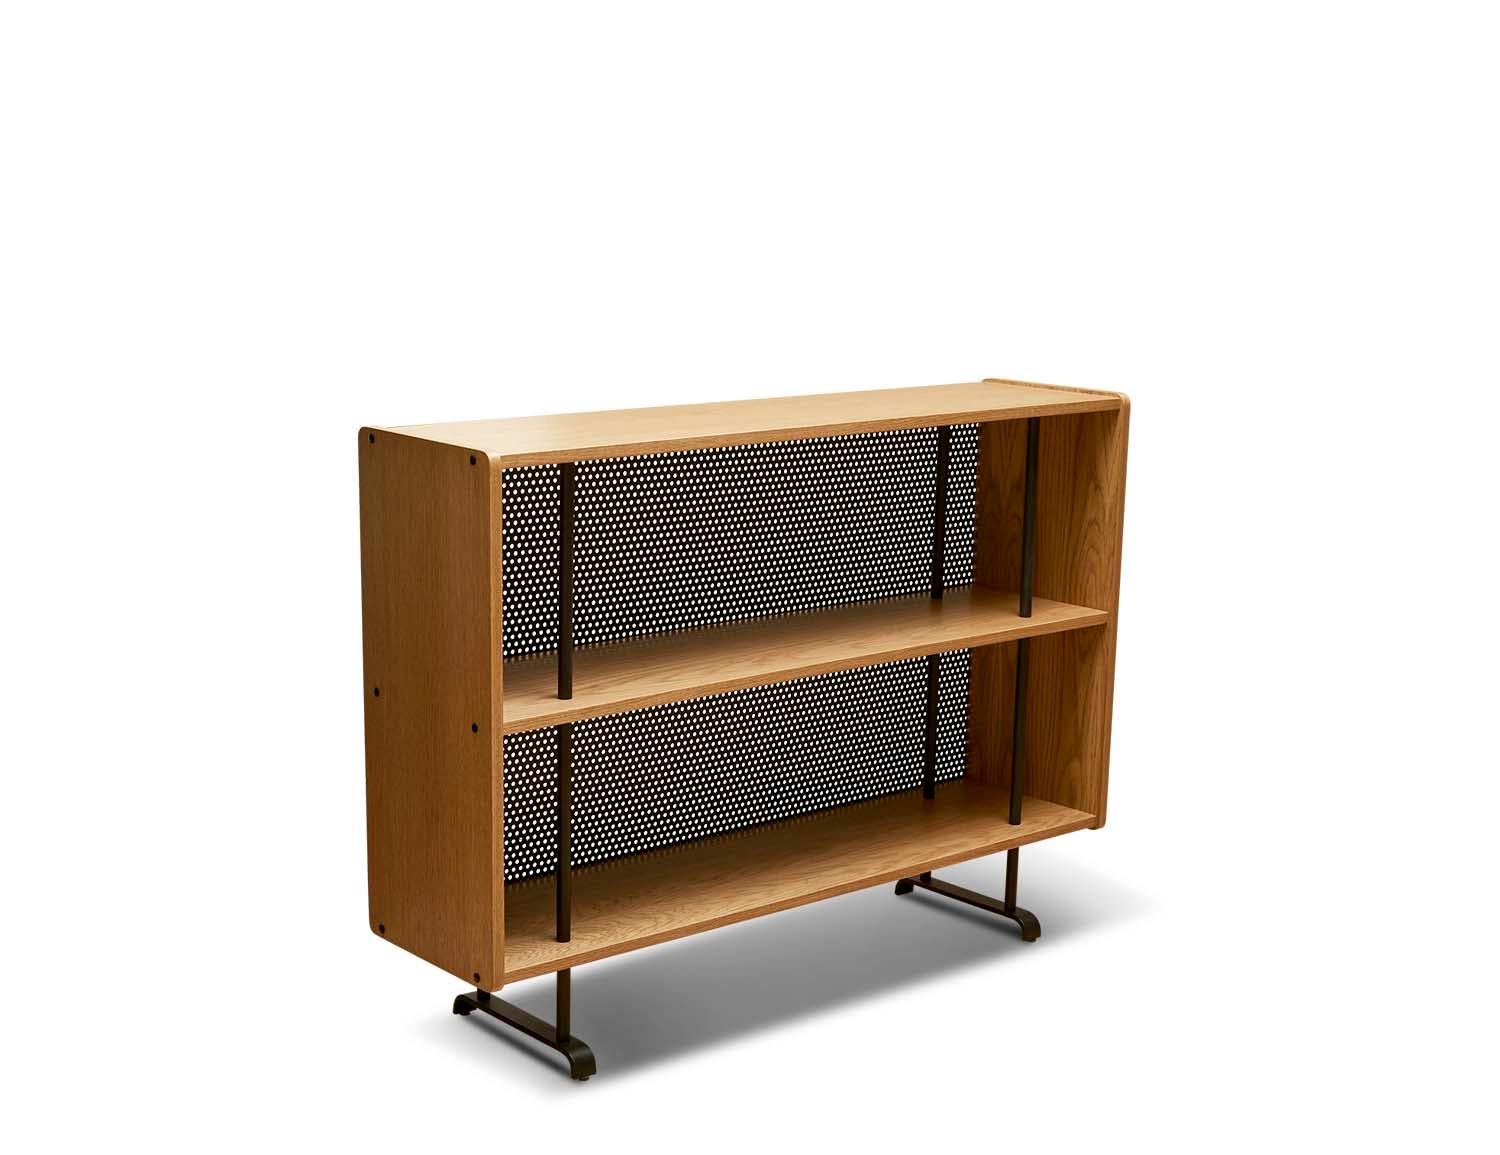 The Maker's bookcase is a freestanding bookcase made of American walnut or white oak. The frame rests on a blackened steel base and features two shelves and a perforated steel detail on the back. 

The Lawson-Fenning Collection is designed and